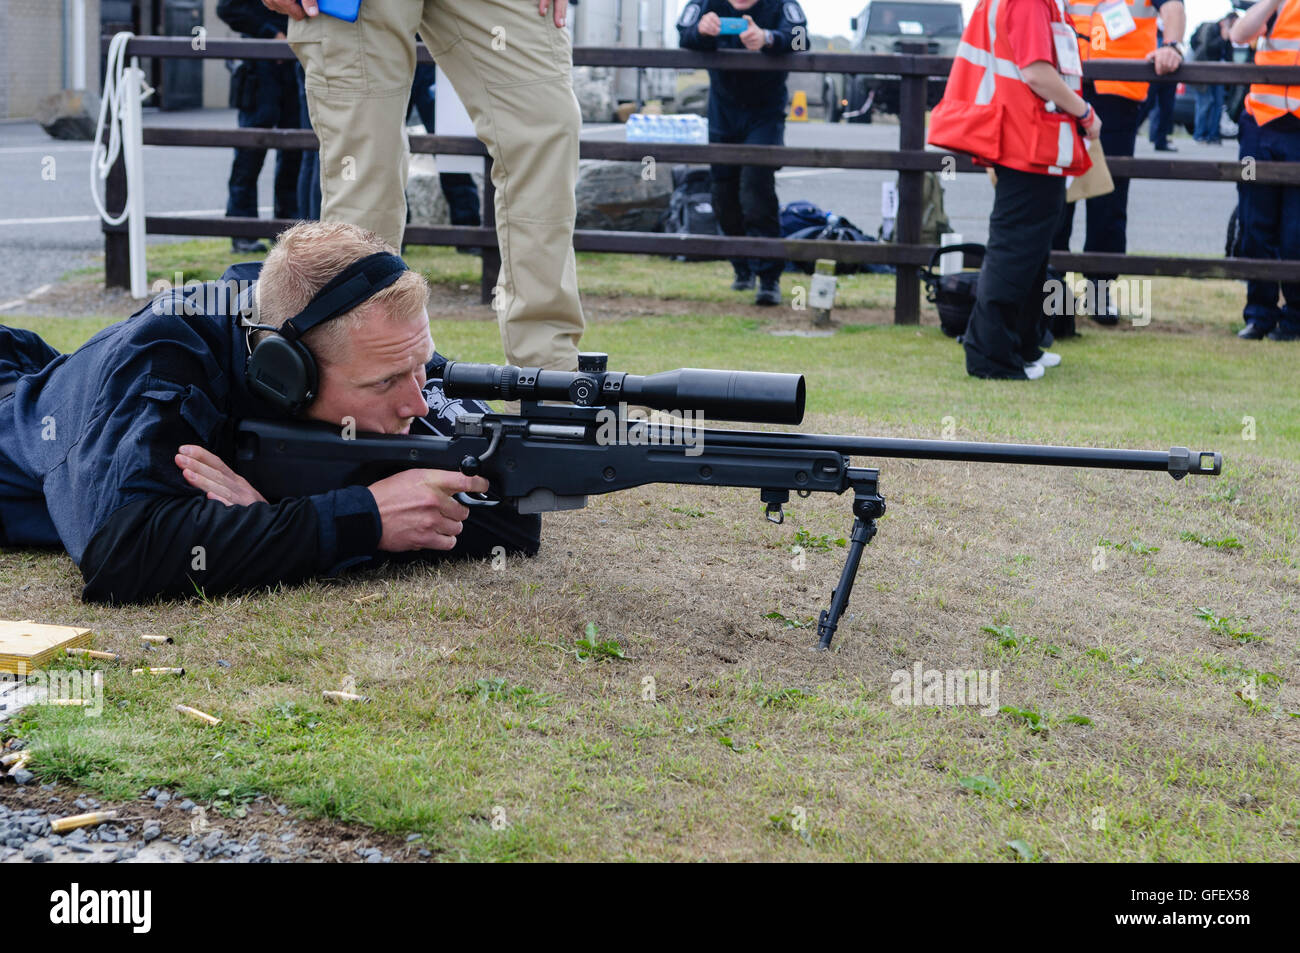 Ballykinlar, Northern Ireland. 2nd August 2013 - A Finnish Police officer fires a Remington 700P bolt-action sniper rifle at the SWAT events at the World Police and Fire Games Stock Photo